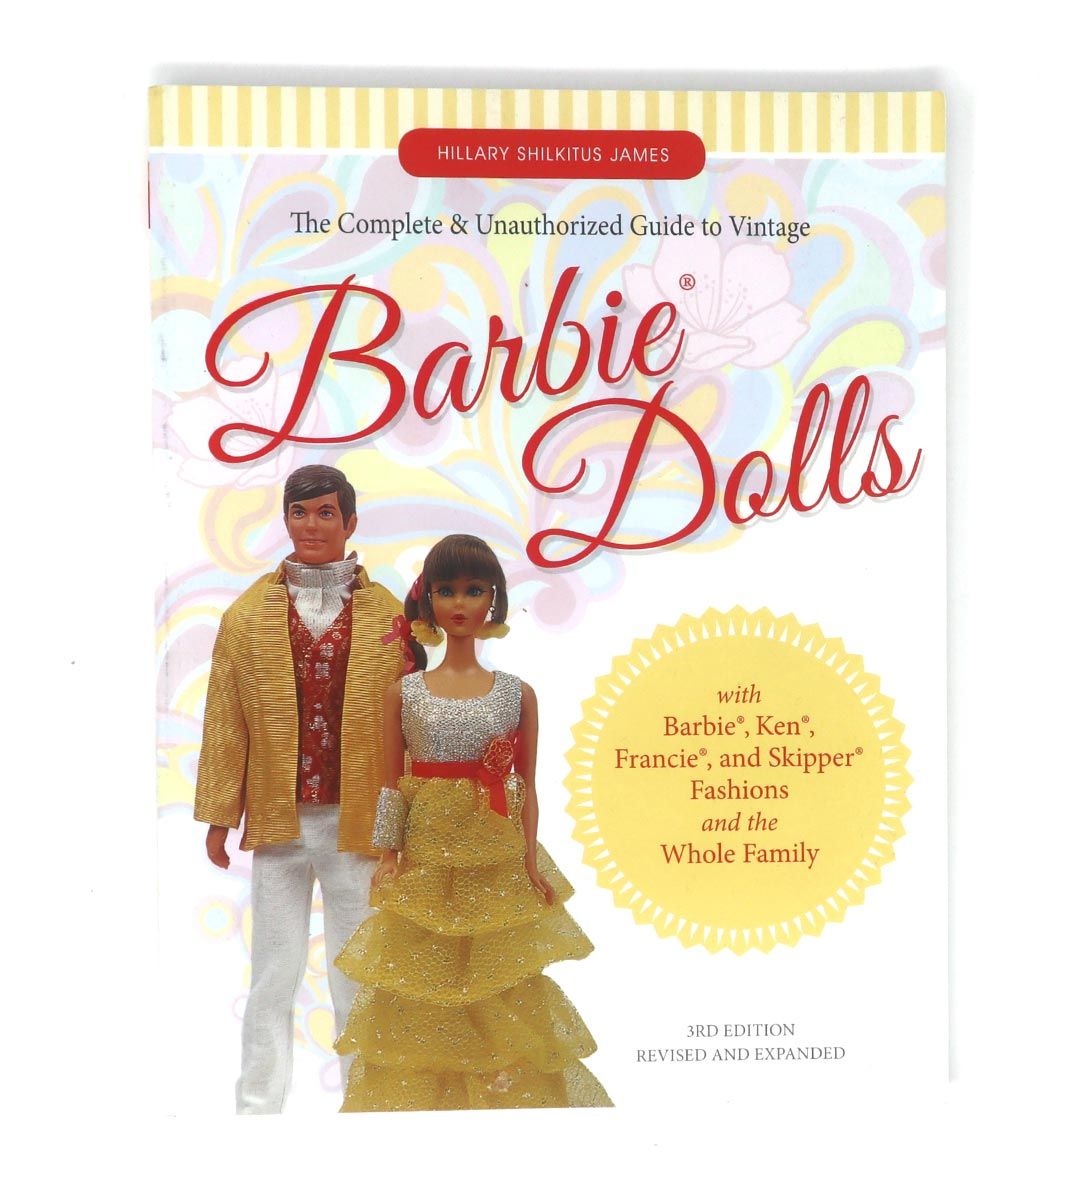 The Complete and Unauthorized Guide to Vintage Barbie Dolls - 3rd Edition Revised and Expanded